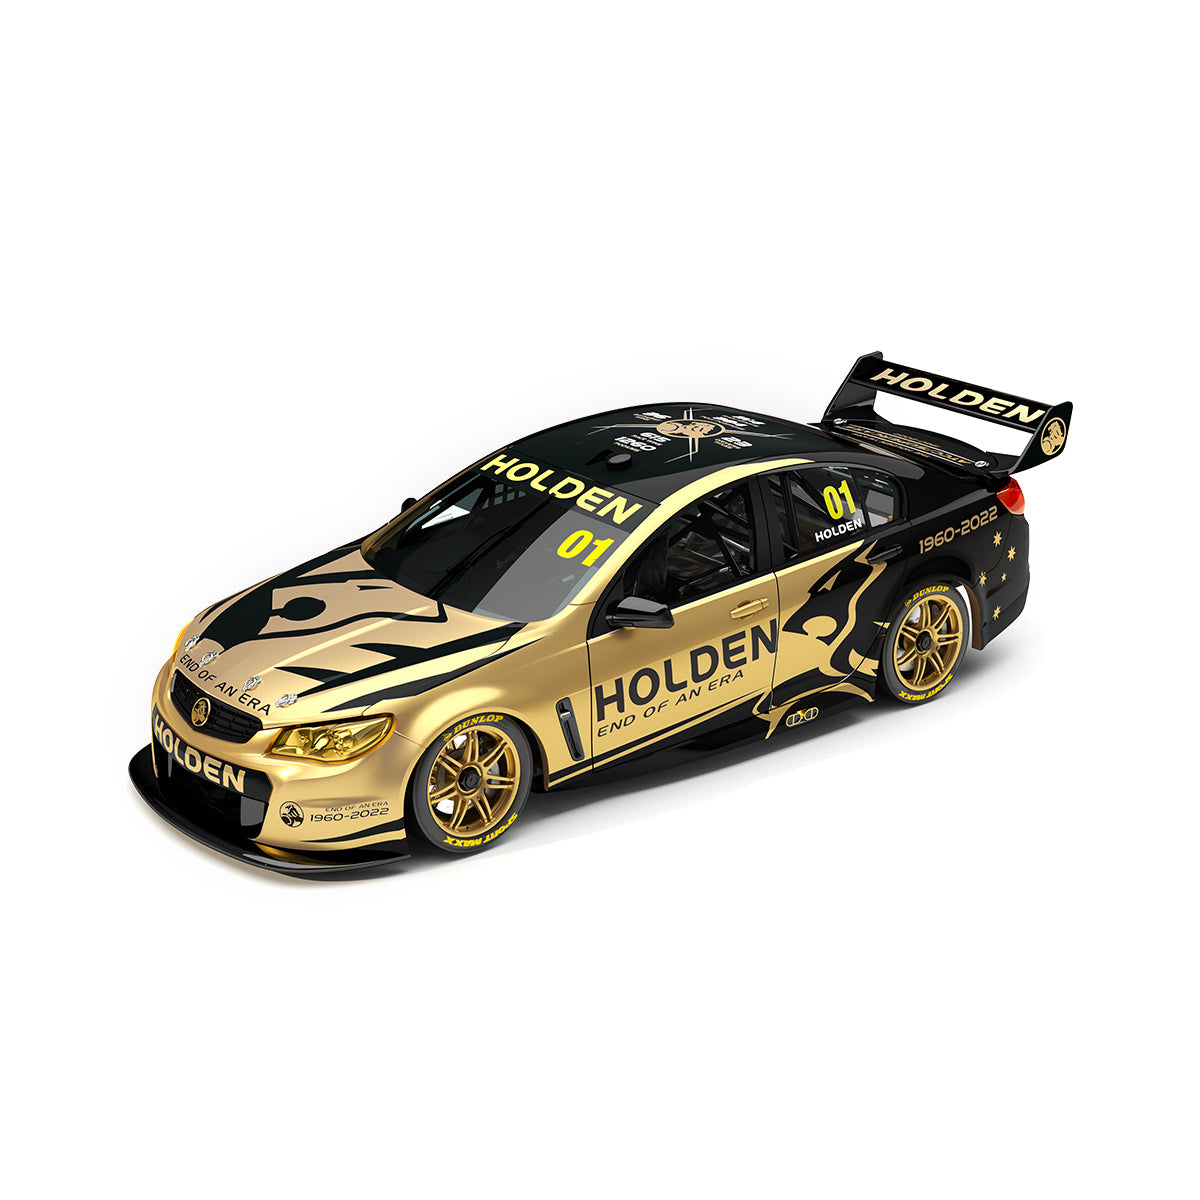 Holden VF Commodore - Holden End of an Era Special Edition Livery, designed by Peter Hughes